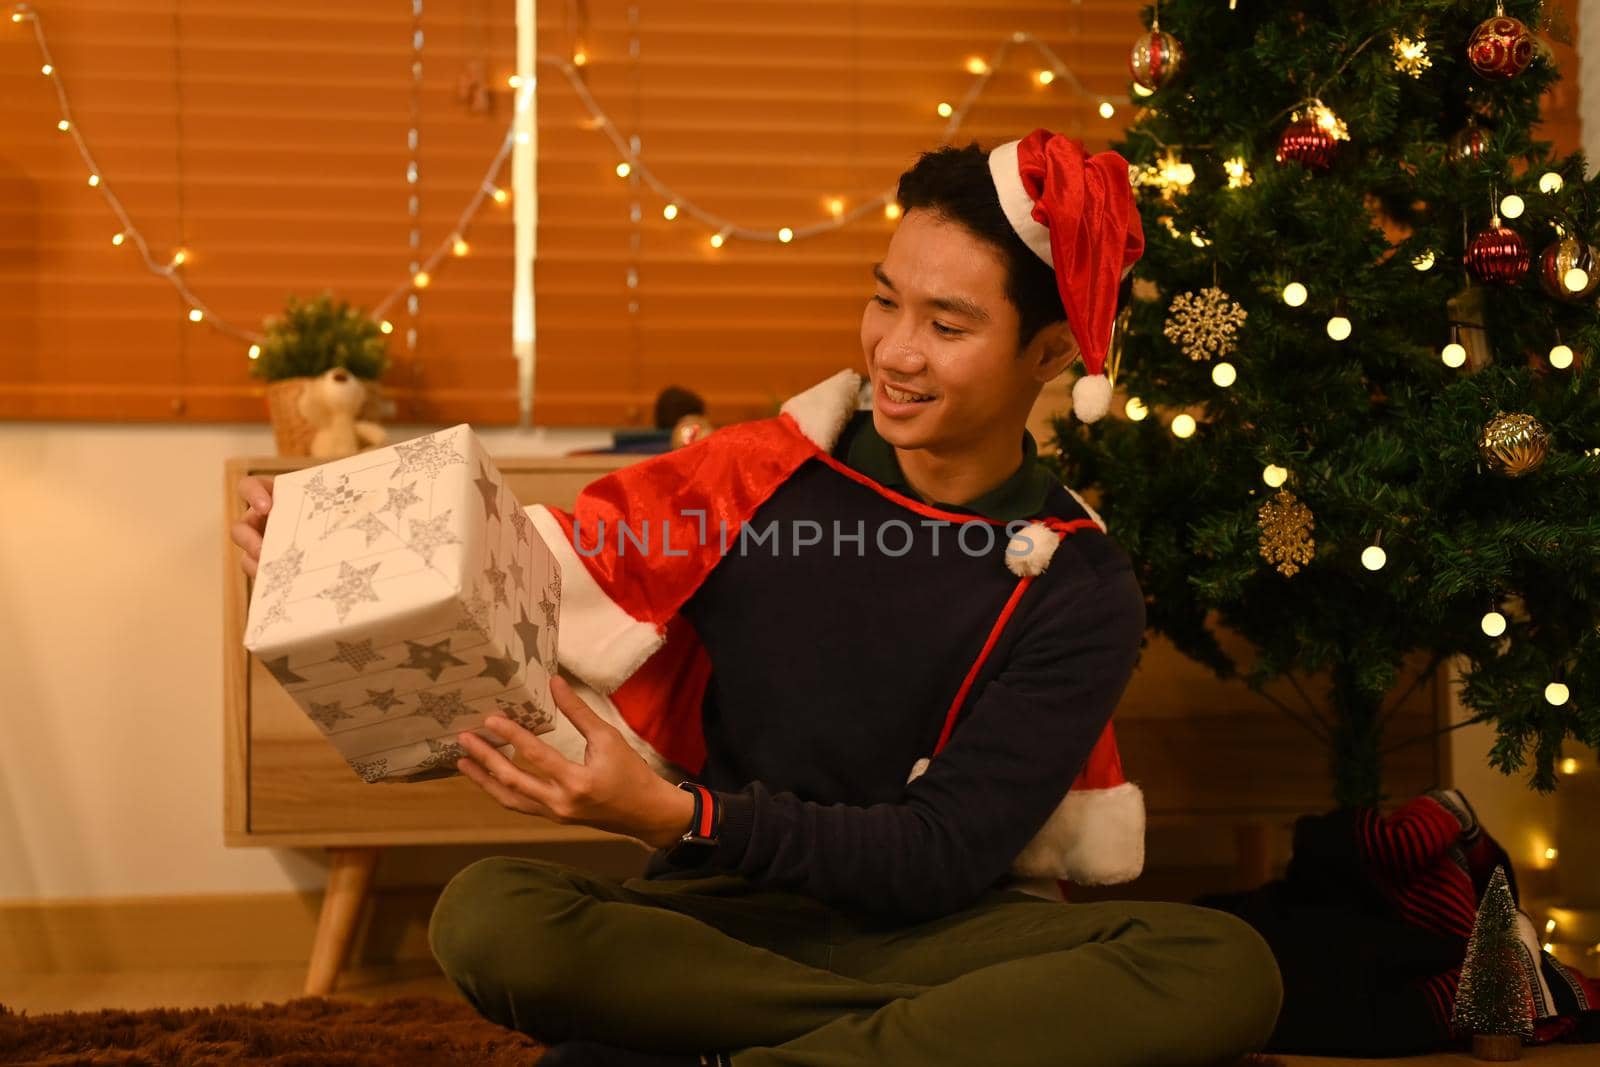 Man in Santa hat opening Christmas gifts, sitting near Christmas tree in decorated room lighted with soft lights.